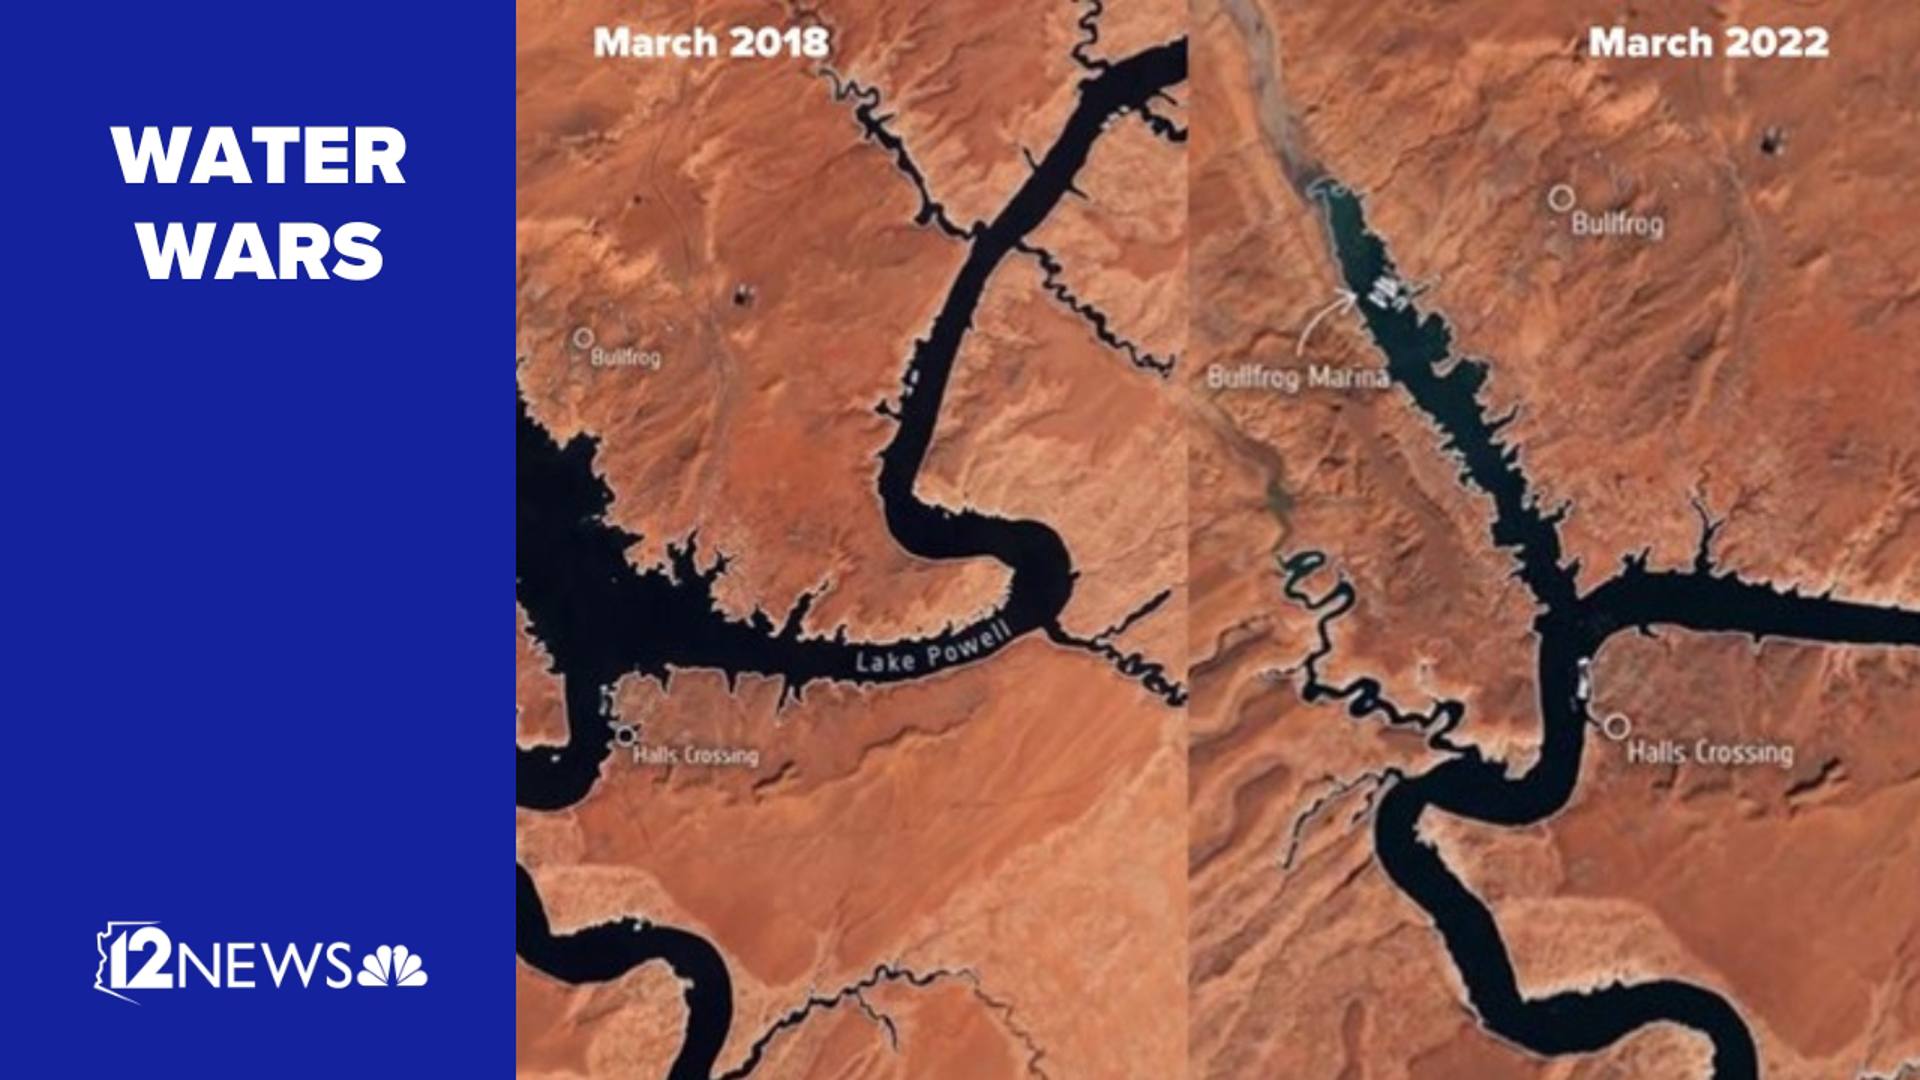 Lake Powell reached its lowest point ever in 2022 and the Bureau of Reclamation is drawing on water from other reservoirs.